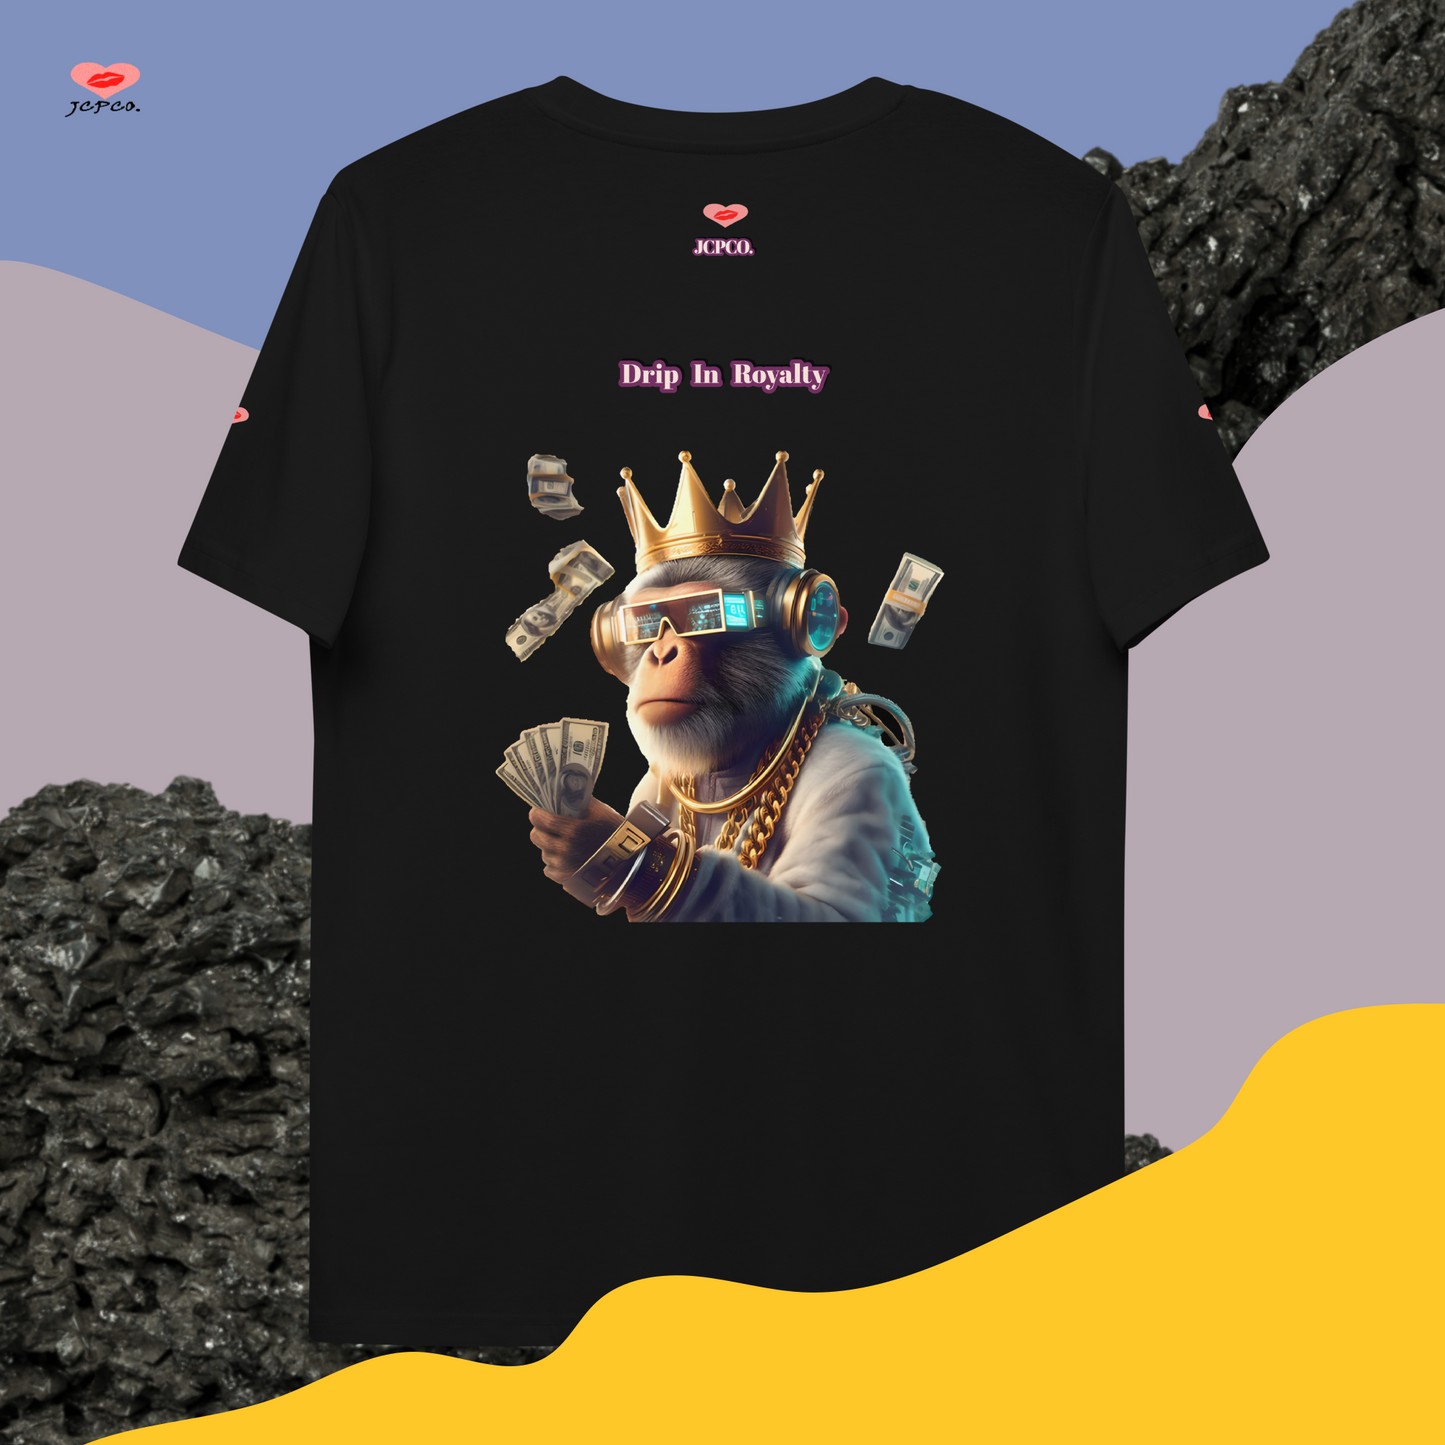 👑Crown Up Stack Up 💵 Drip in Royalty💎 Monkey🐵 Unisex organic cotton t-shirt👕